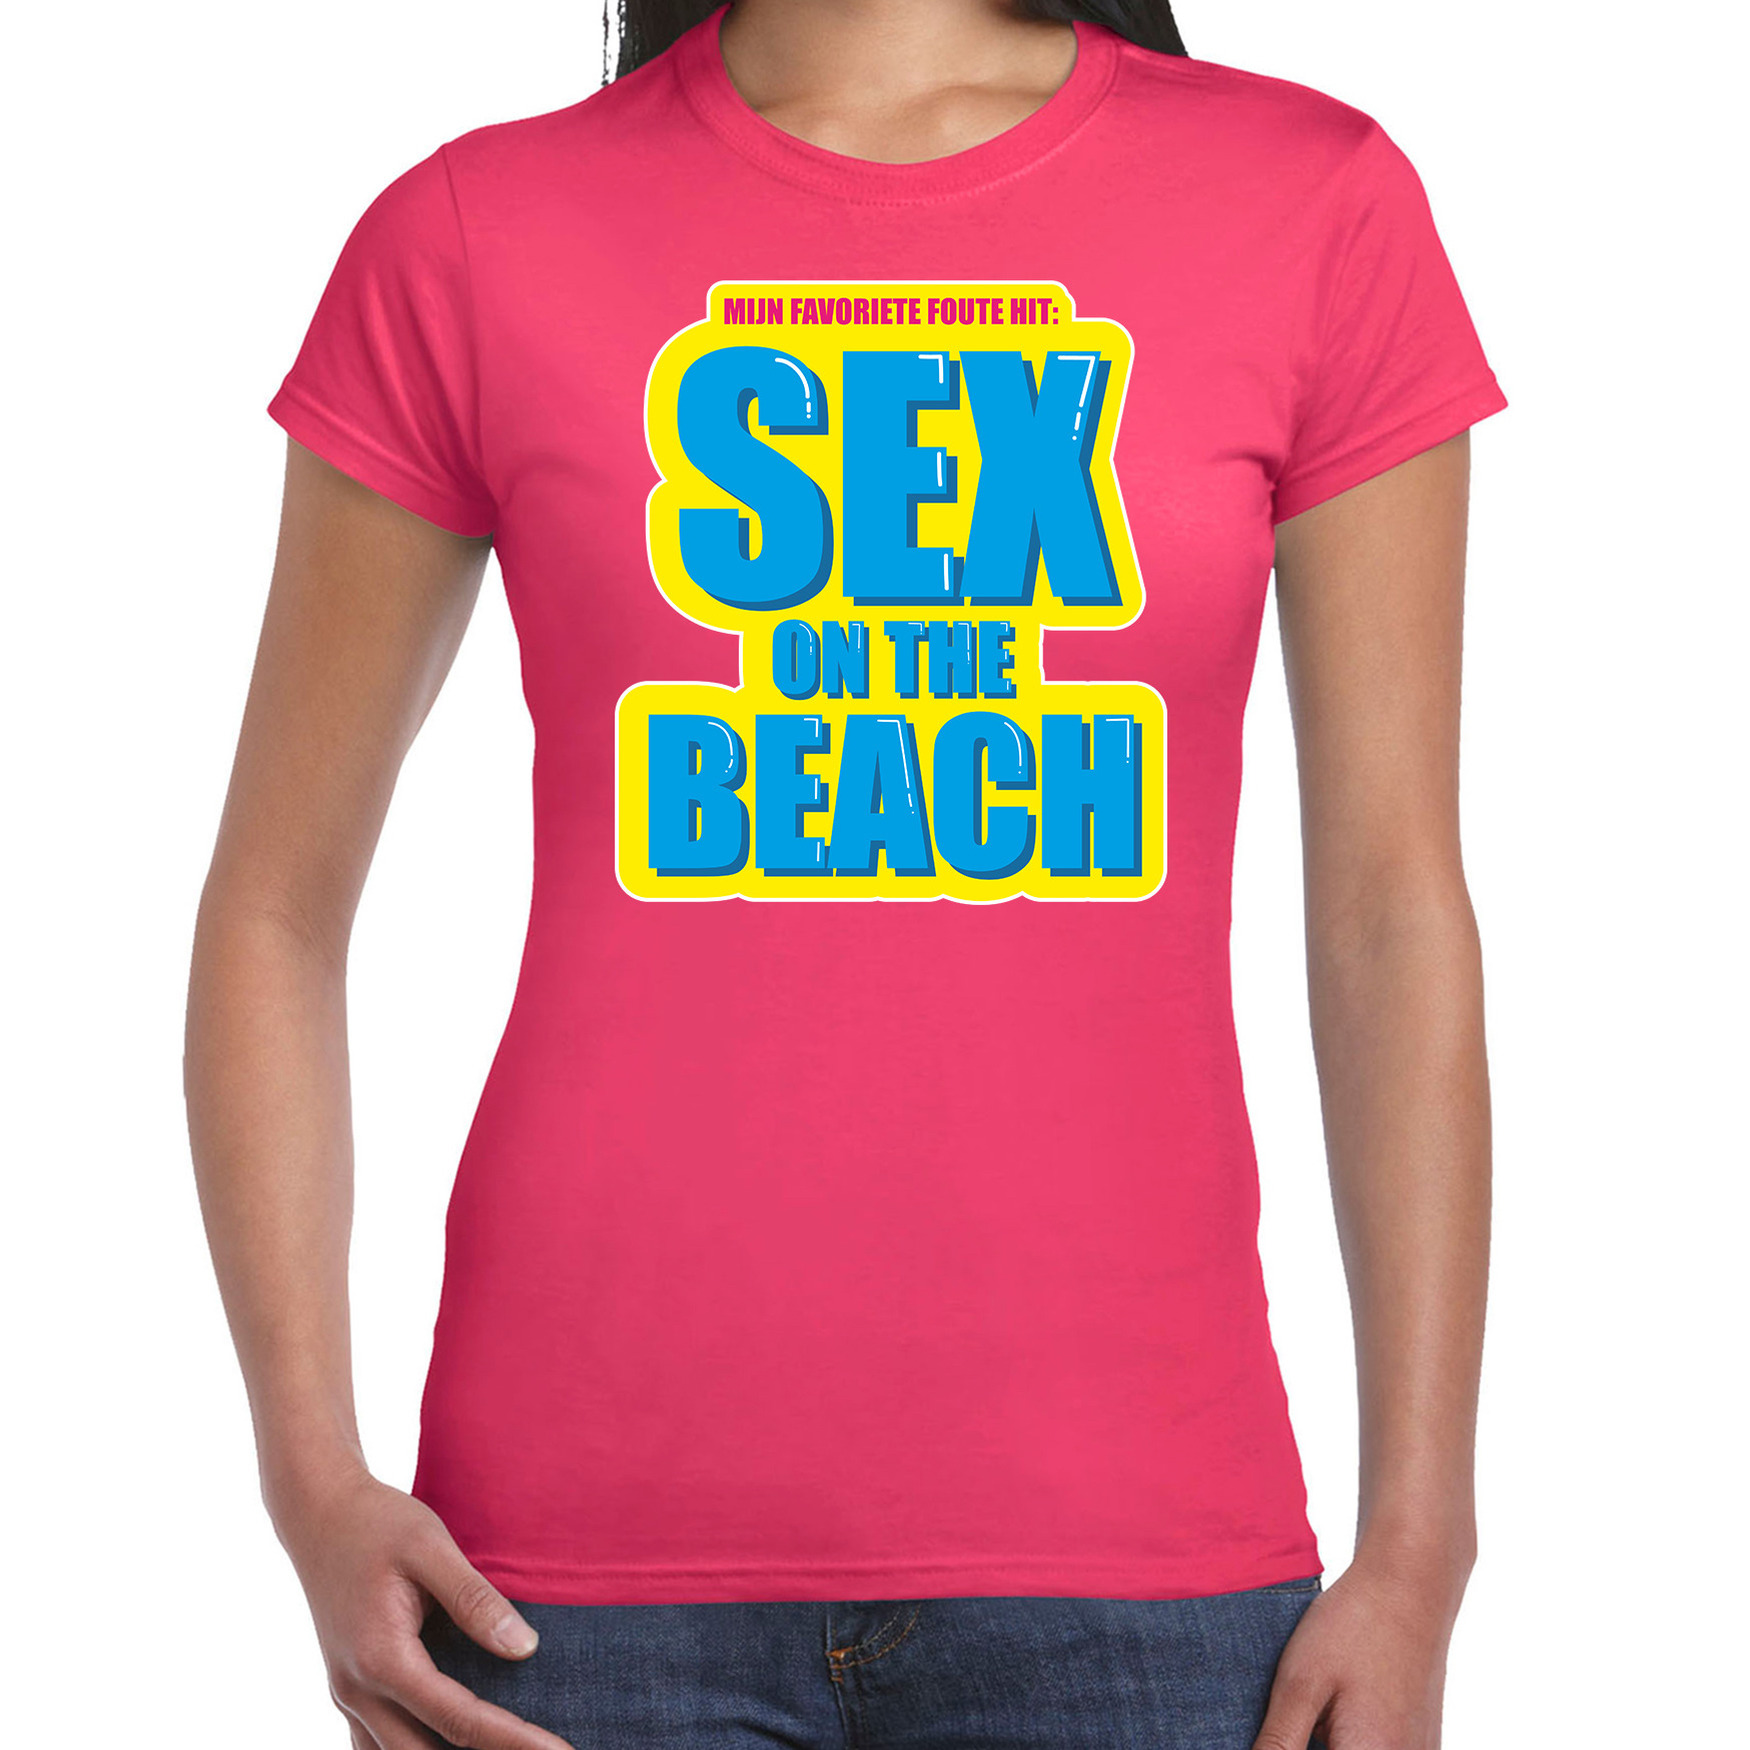 Foute party Sex on the beach verkleed t-shirt roze dames - Foute party hits outfit/ kleding